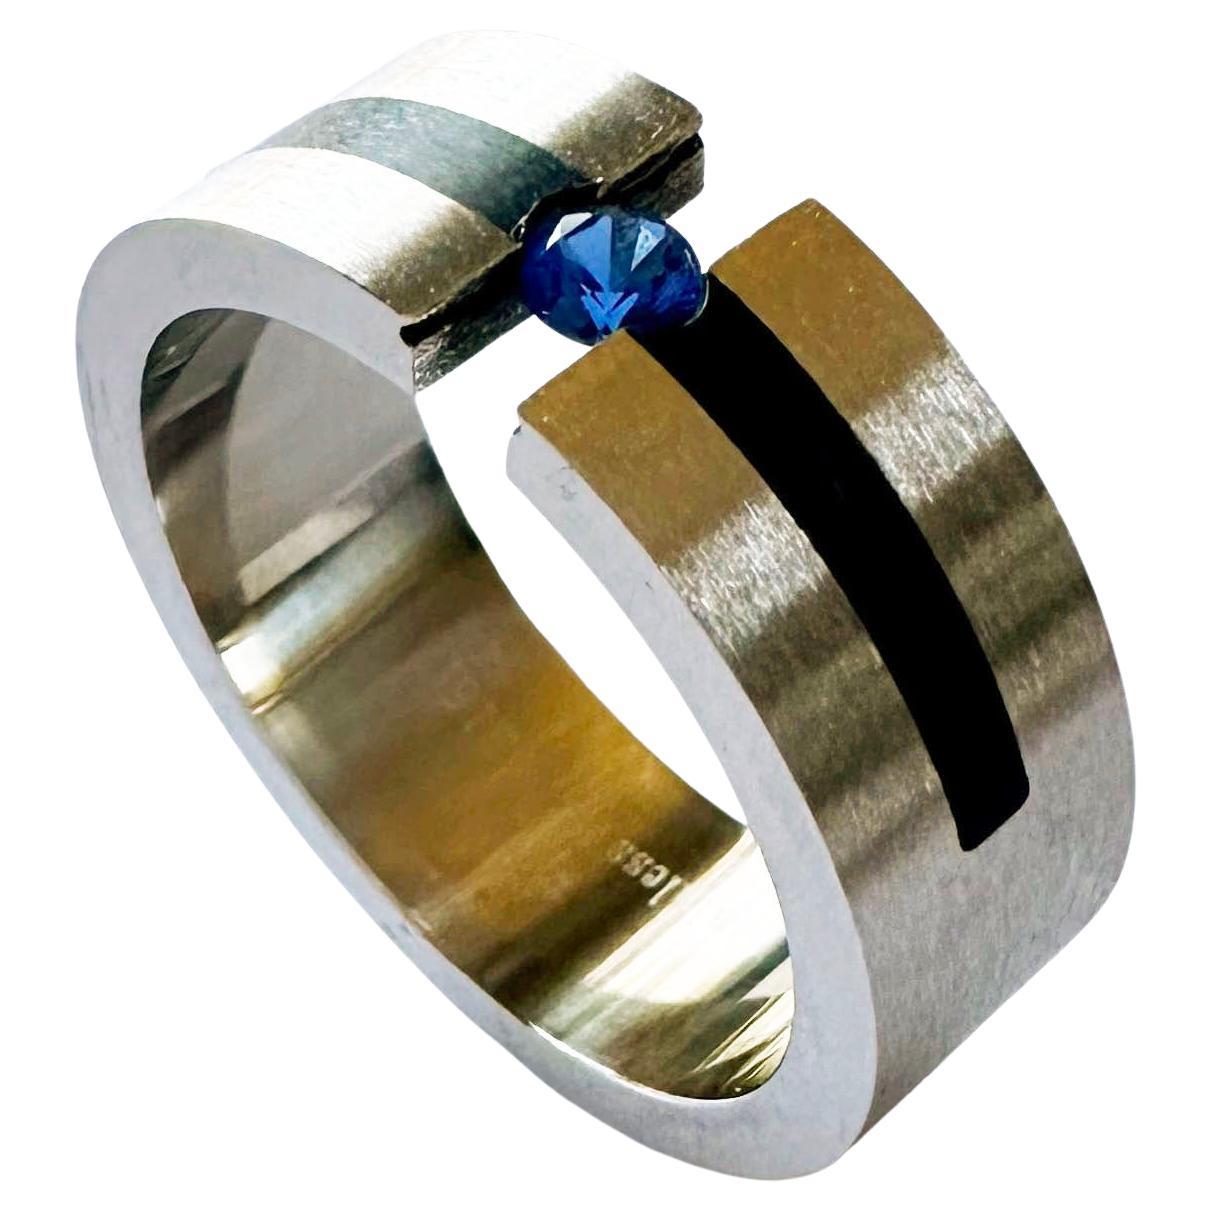 Stainless Steel Tension Ring set with Sapphire